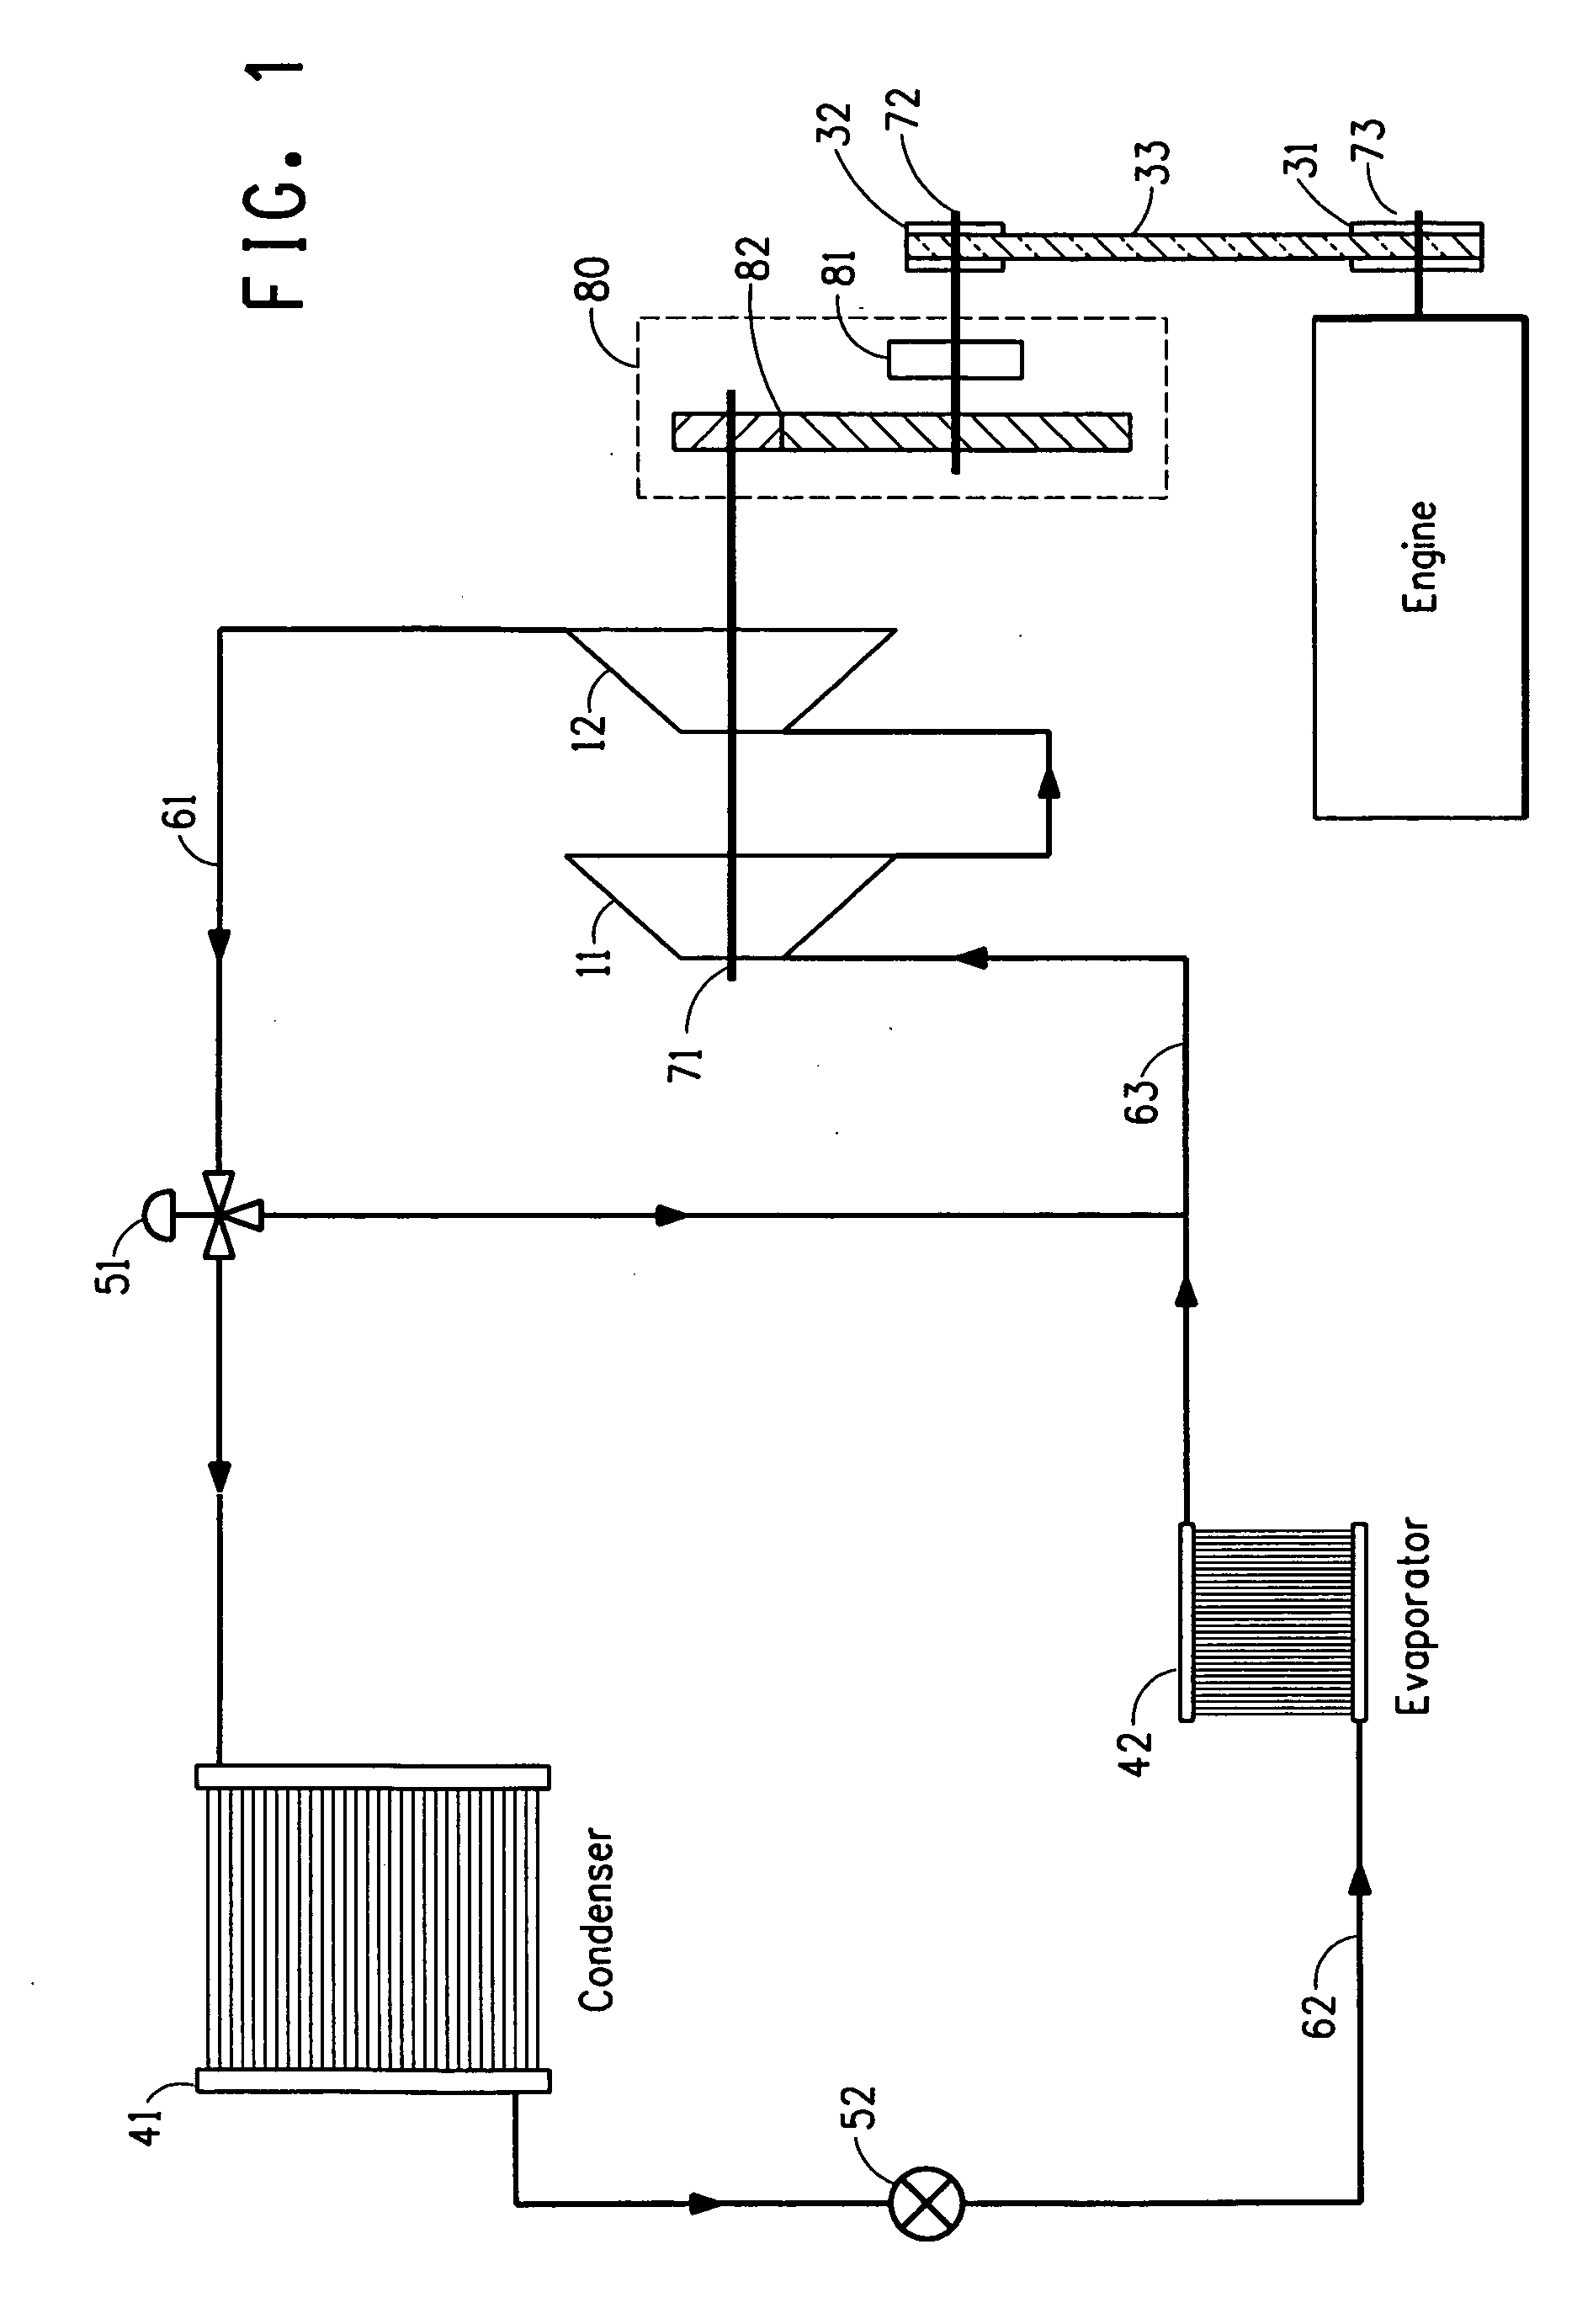 Cooling apparatus powered by a ratioed gear drive assembly